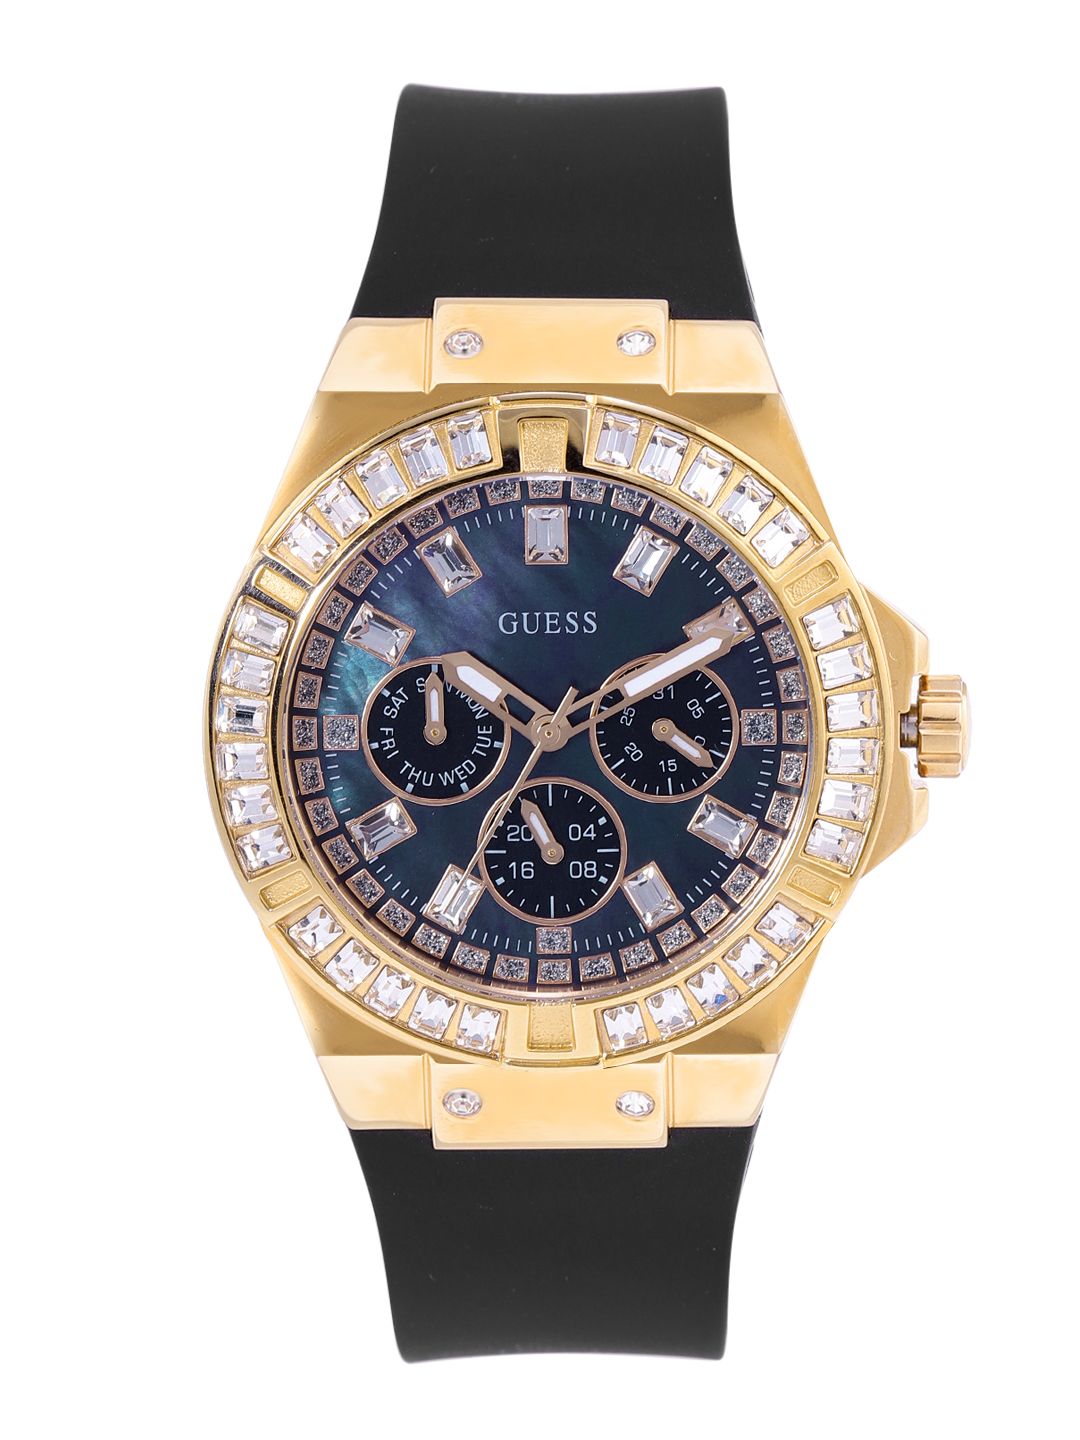 GUESS Women Navy Blue Embellished Dial & Black Straps Analogue Watch GW0118L2 Price in India